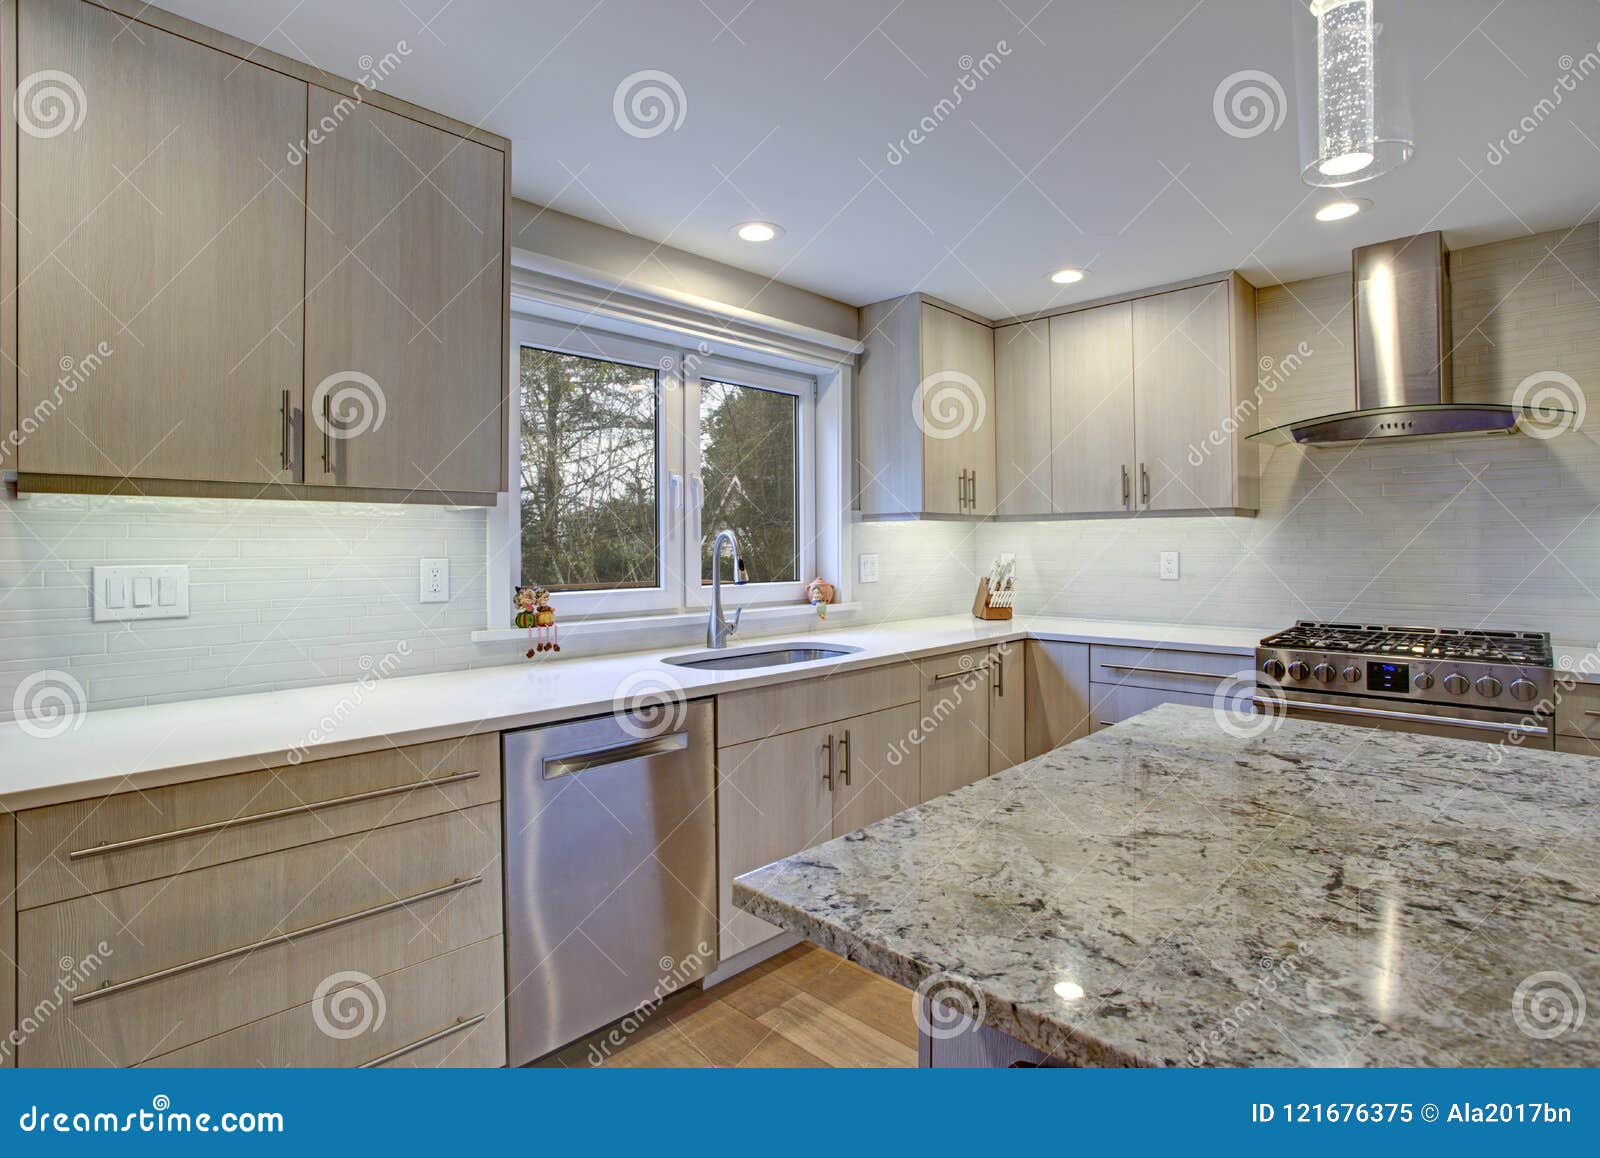 Lovely Kitchen Room With Kitchen Island Stock Image Image Of